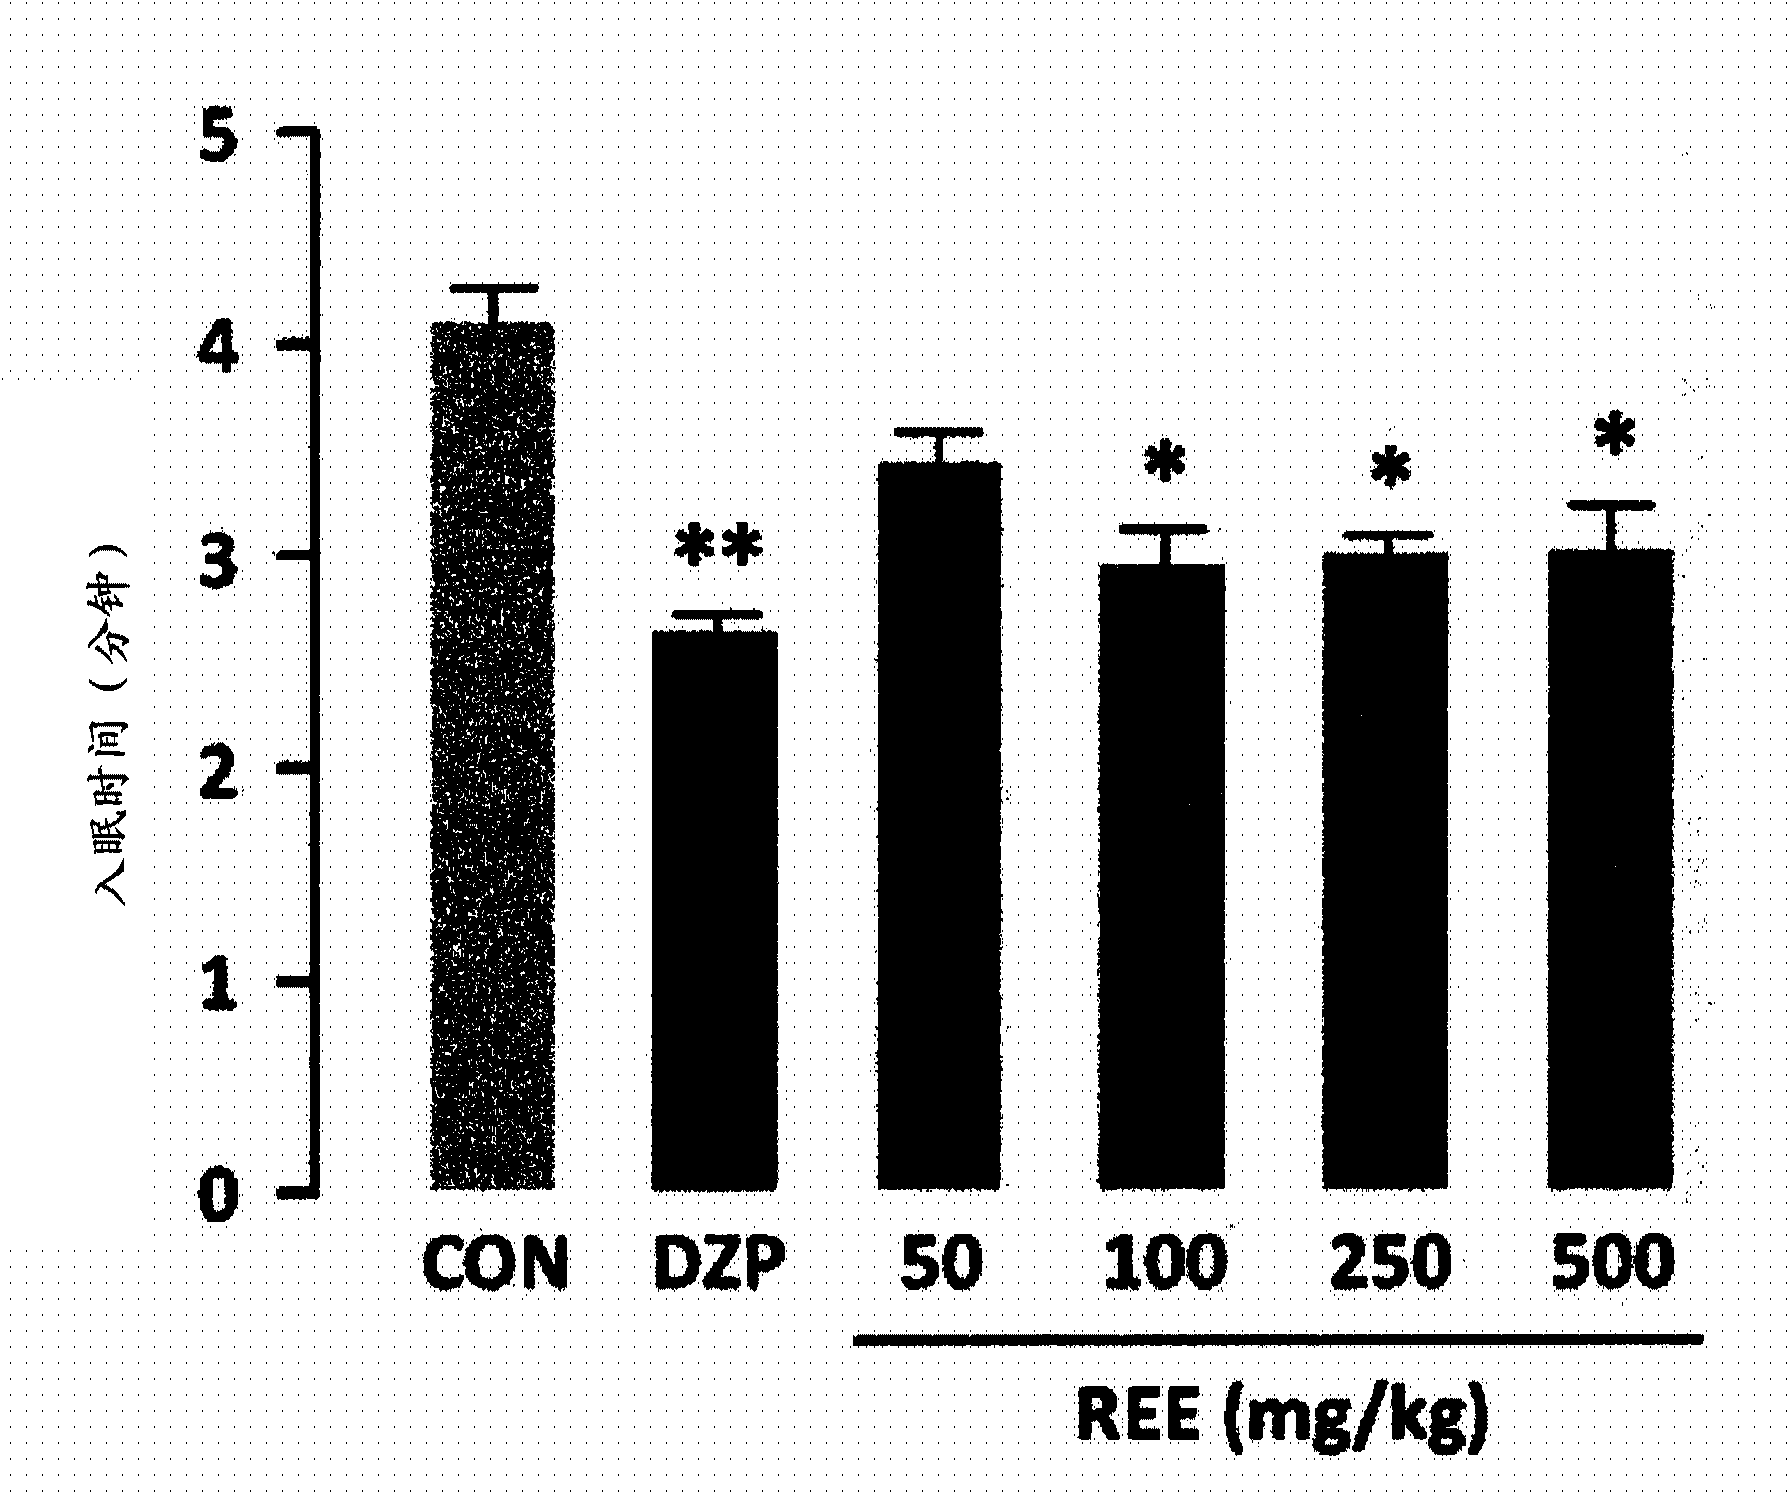 Novel usage of rice, rice bran, or chaff extract as histamine receptor antagonist